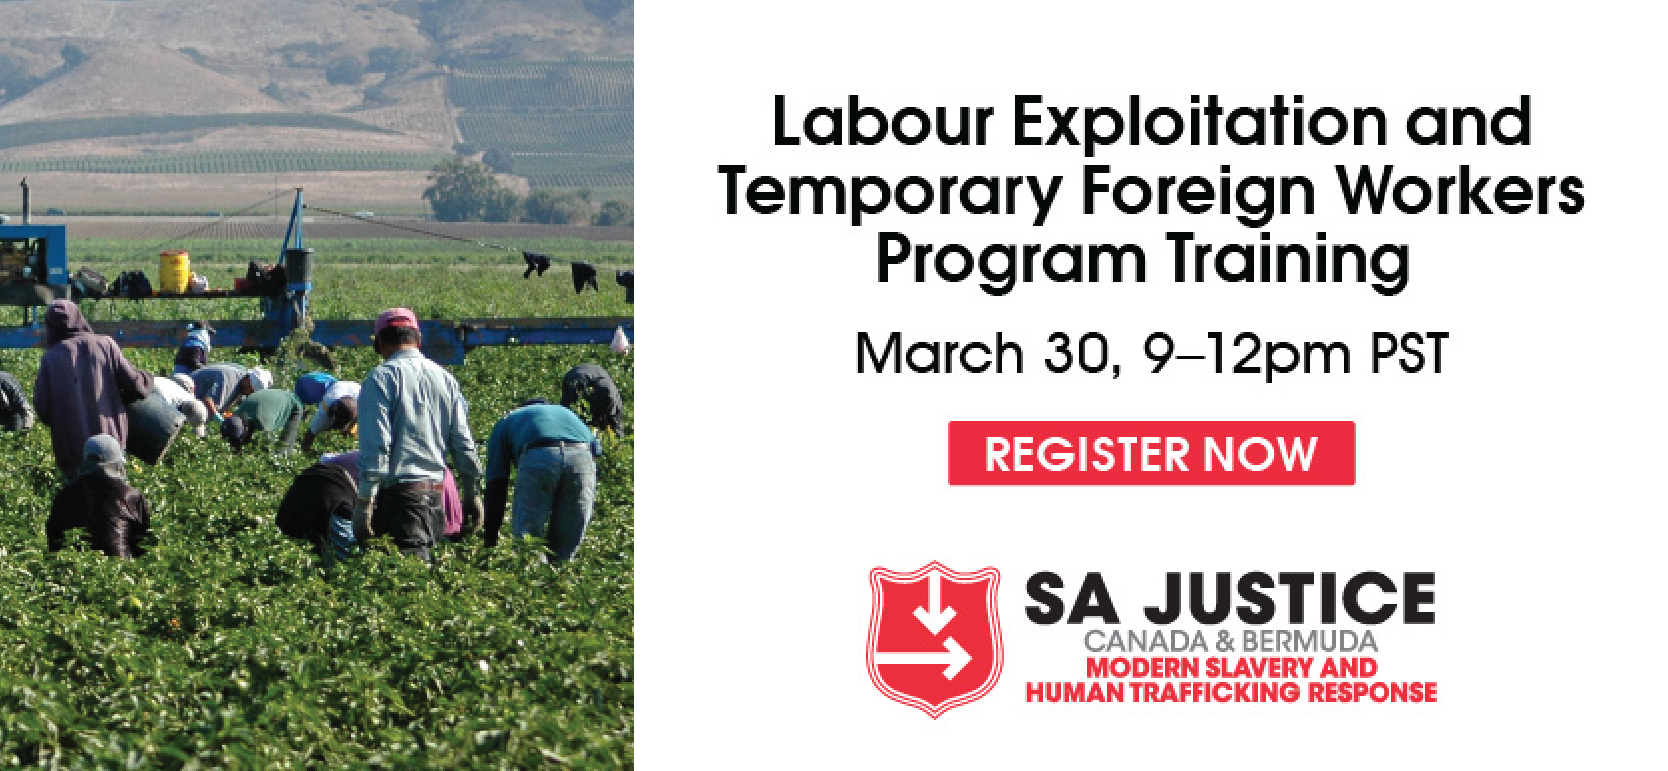 Temporary Foreign Workers Program and Labour Exploitation Training